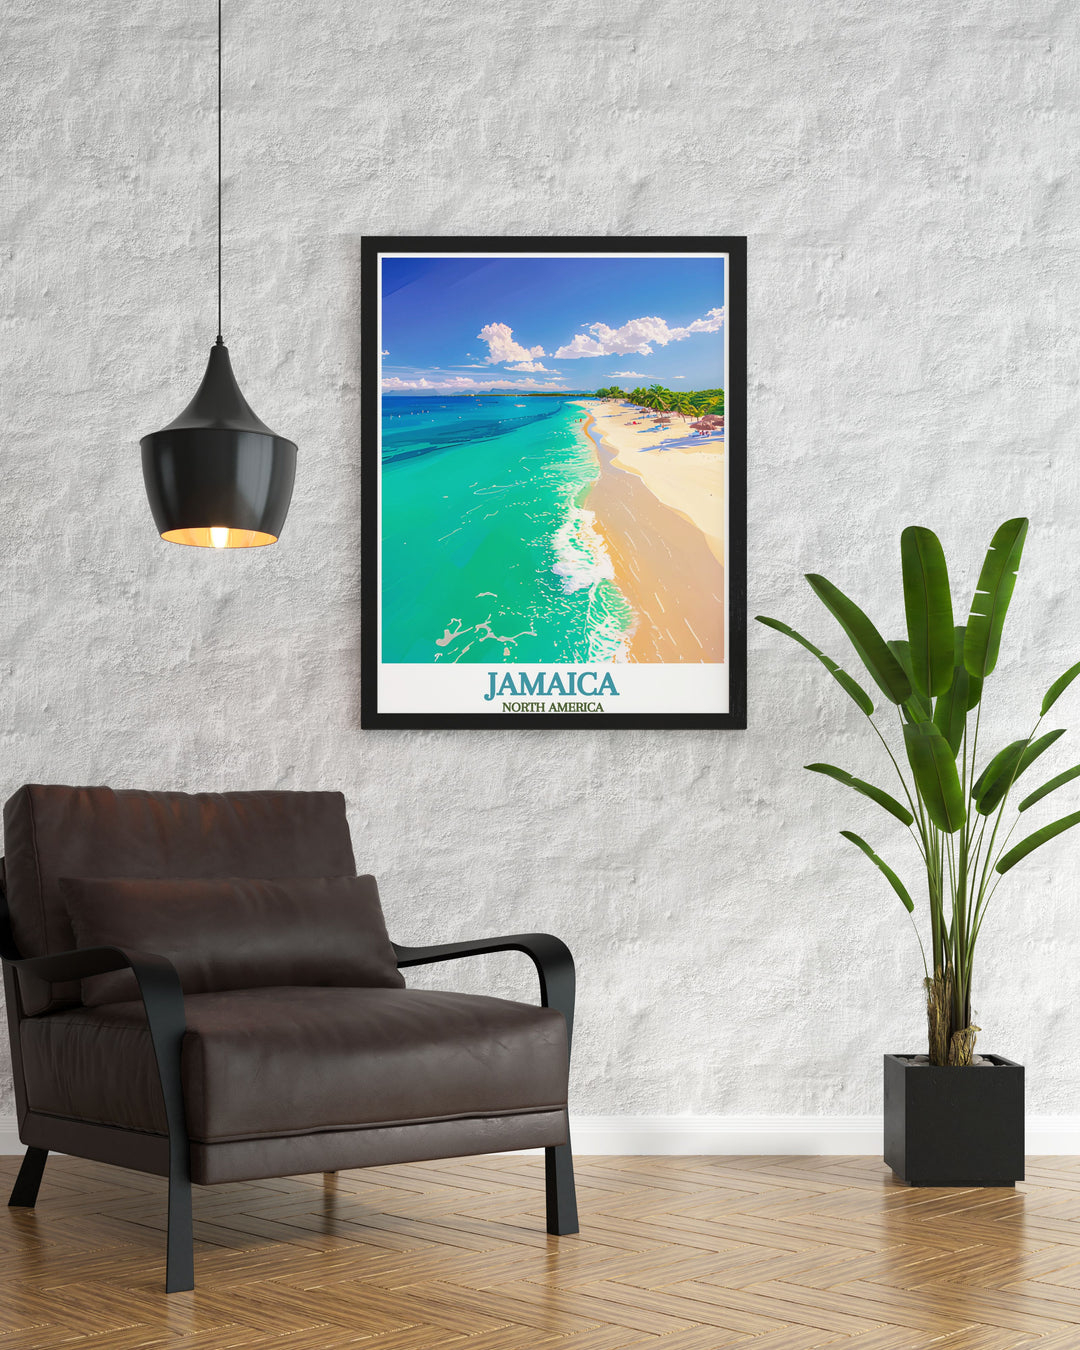 Featuring the picturesque Seven Mile Beach, this art print brings the serene and tropical ambiance of Jamaica into your living space with vivid colors and detail.